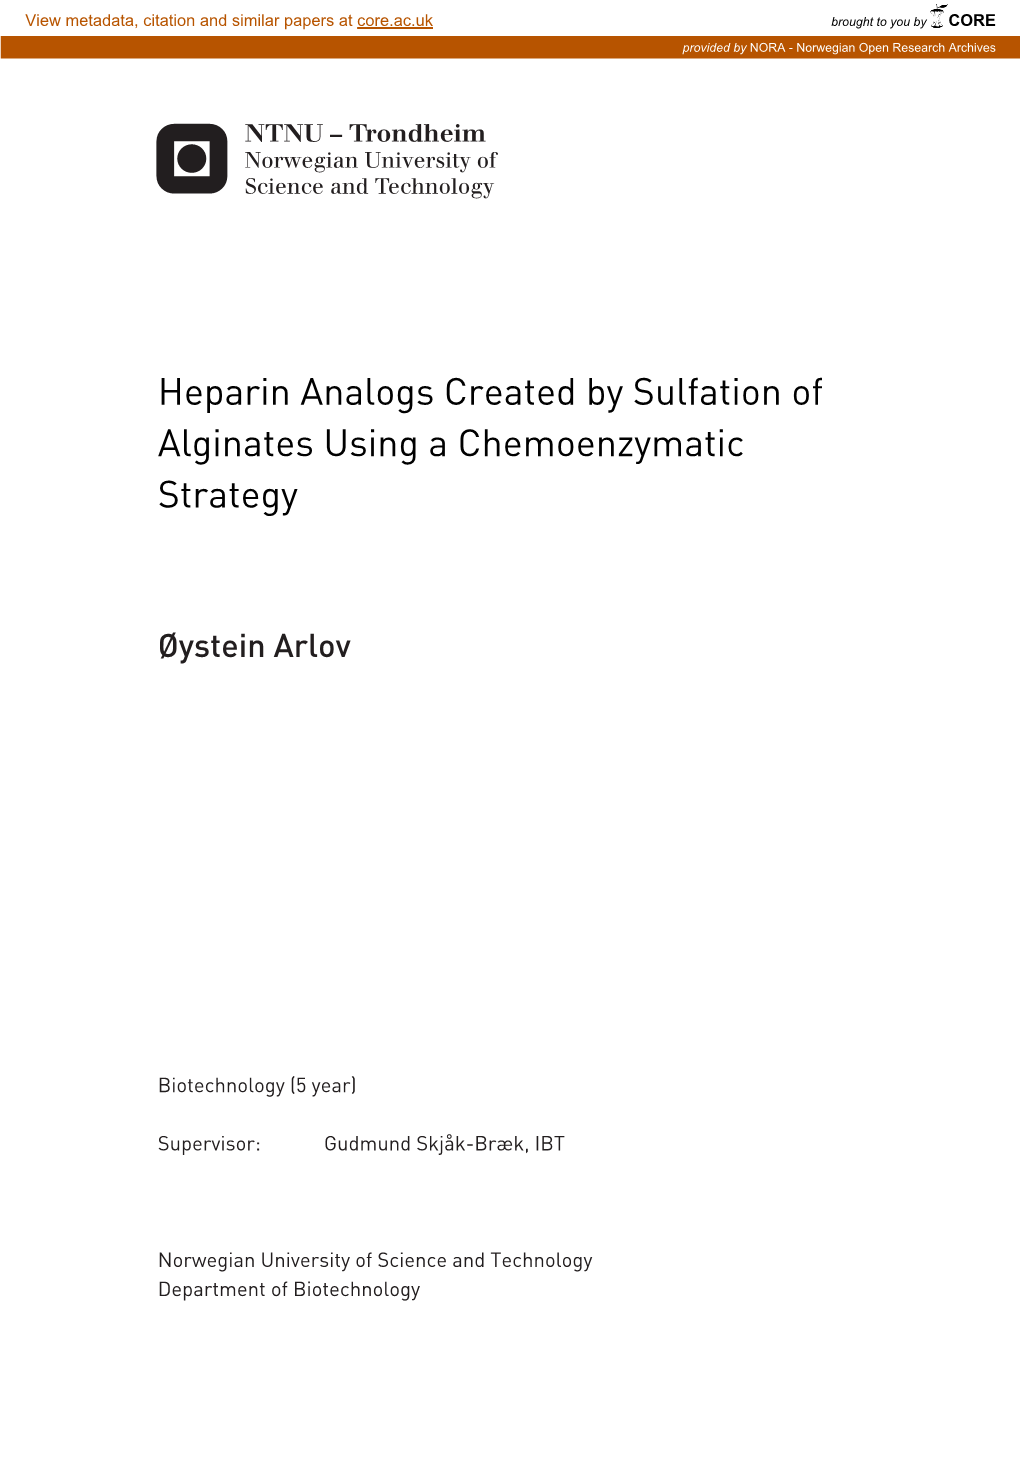 Heparin Analogs Created by Sulfation of Alginates Using a Chemoenzymatic Strategy